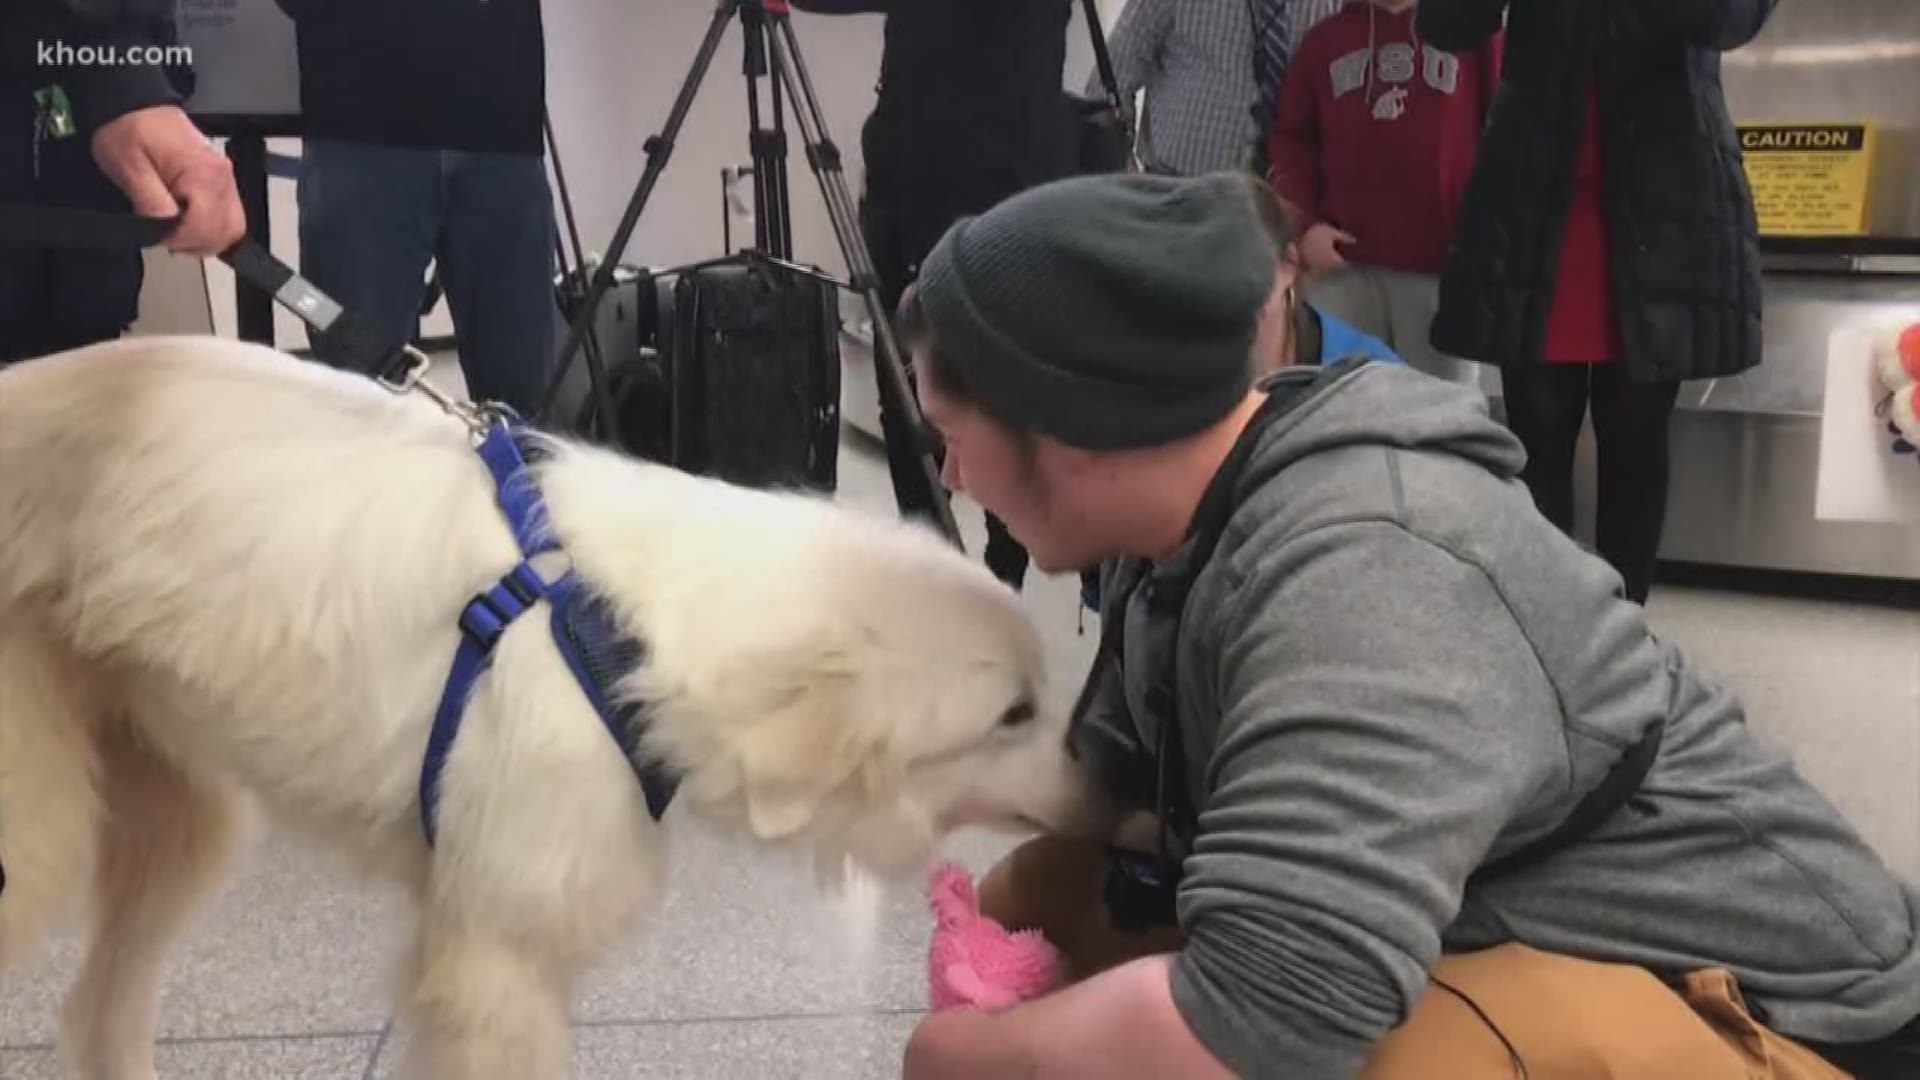 A heartwarming reunion took place Friday for an airman and his dog, Wrangler.